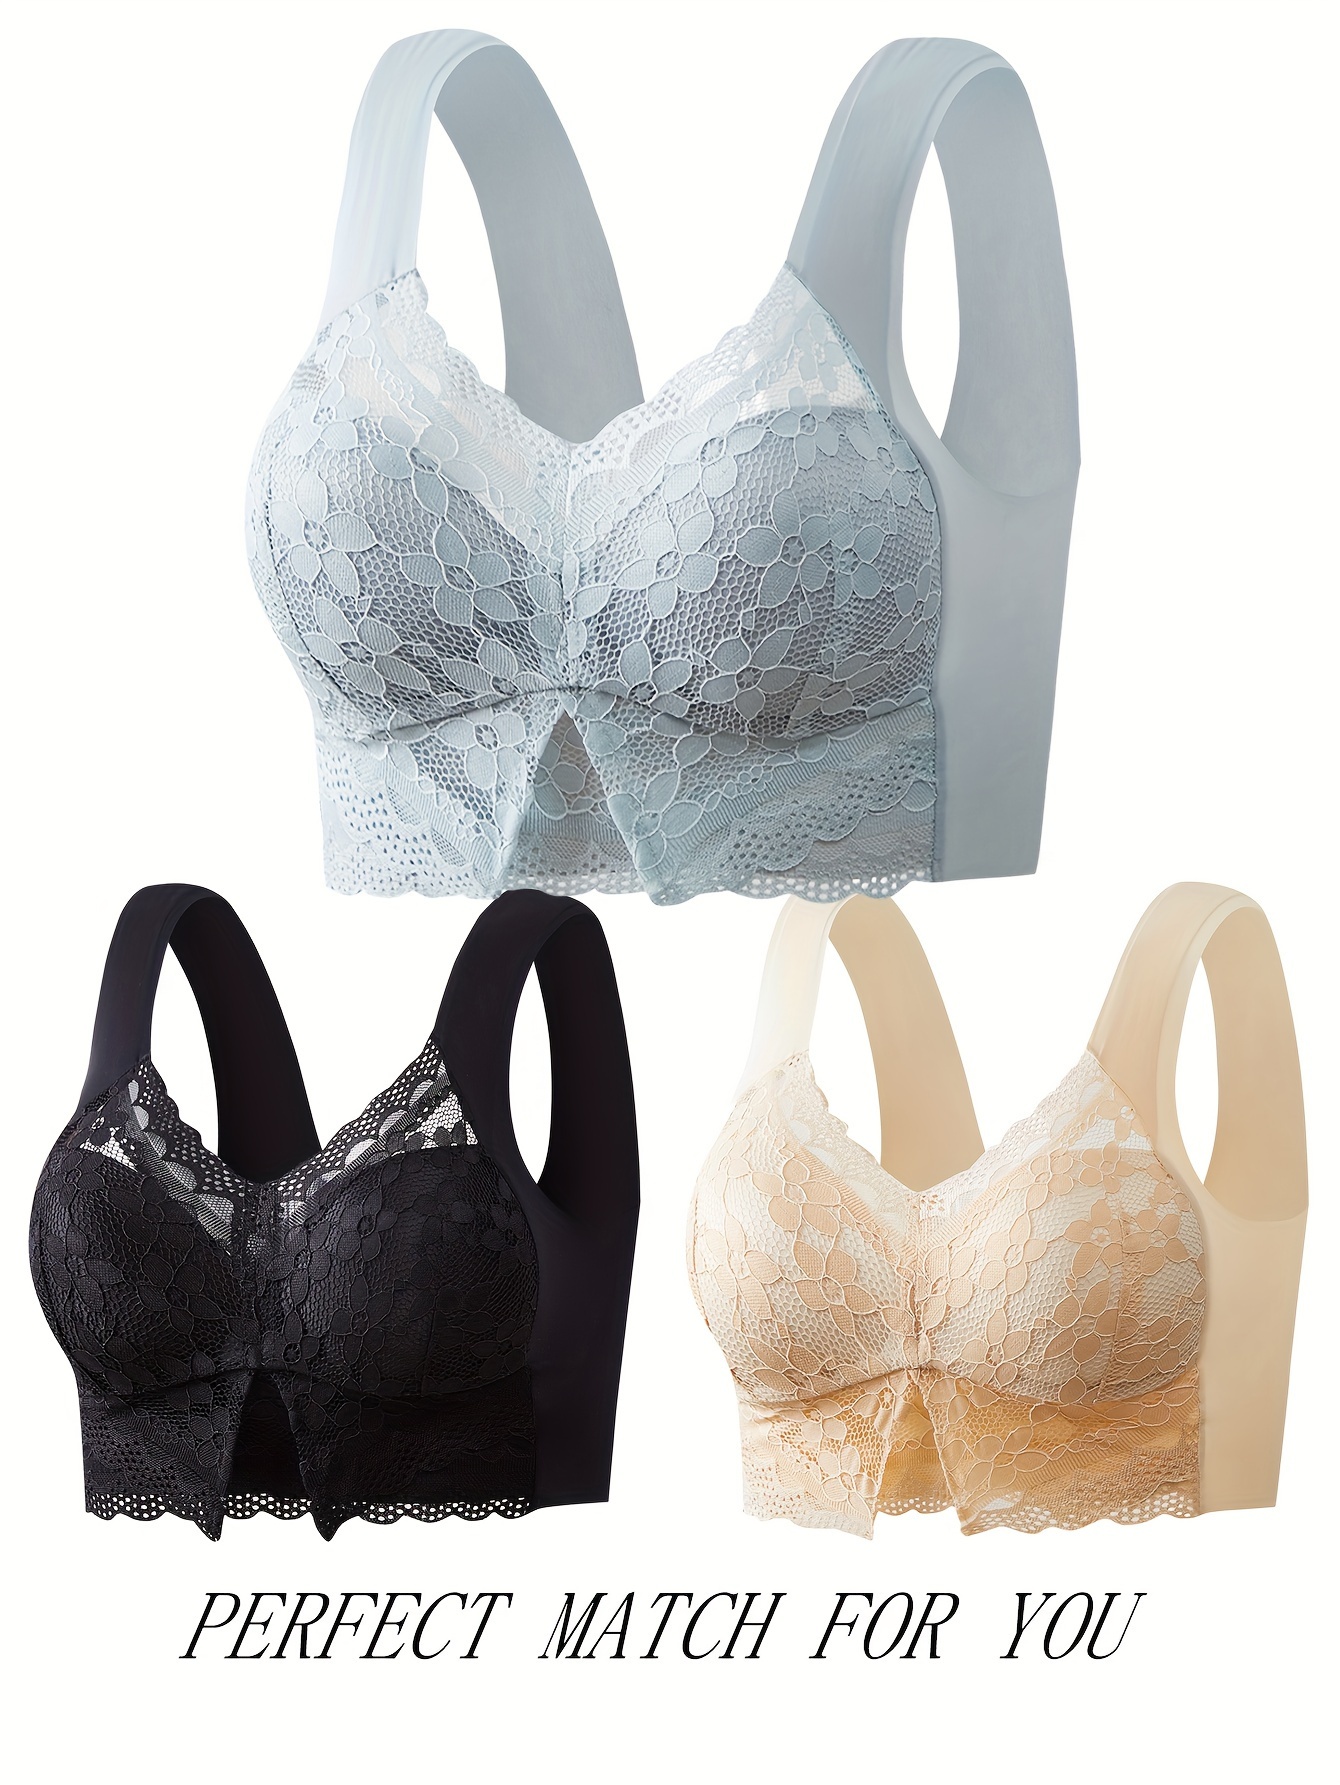 Underwire Contrast Lace Bra - Enhanced Support - Macaroon